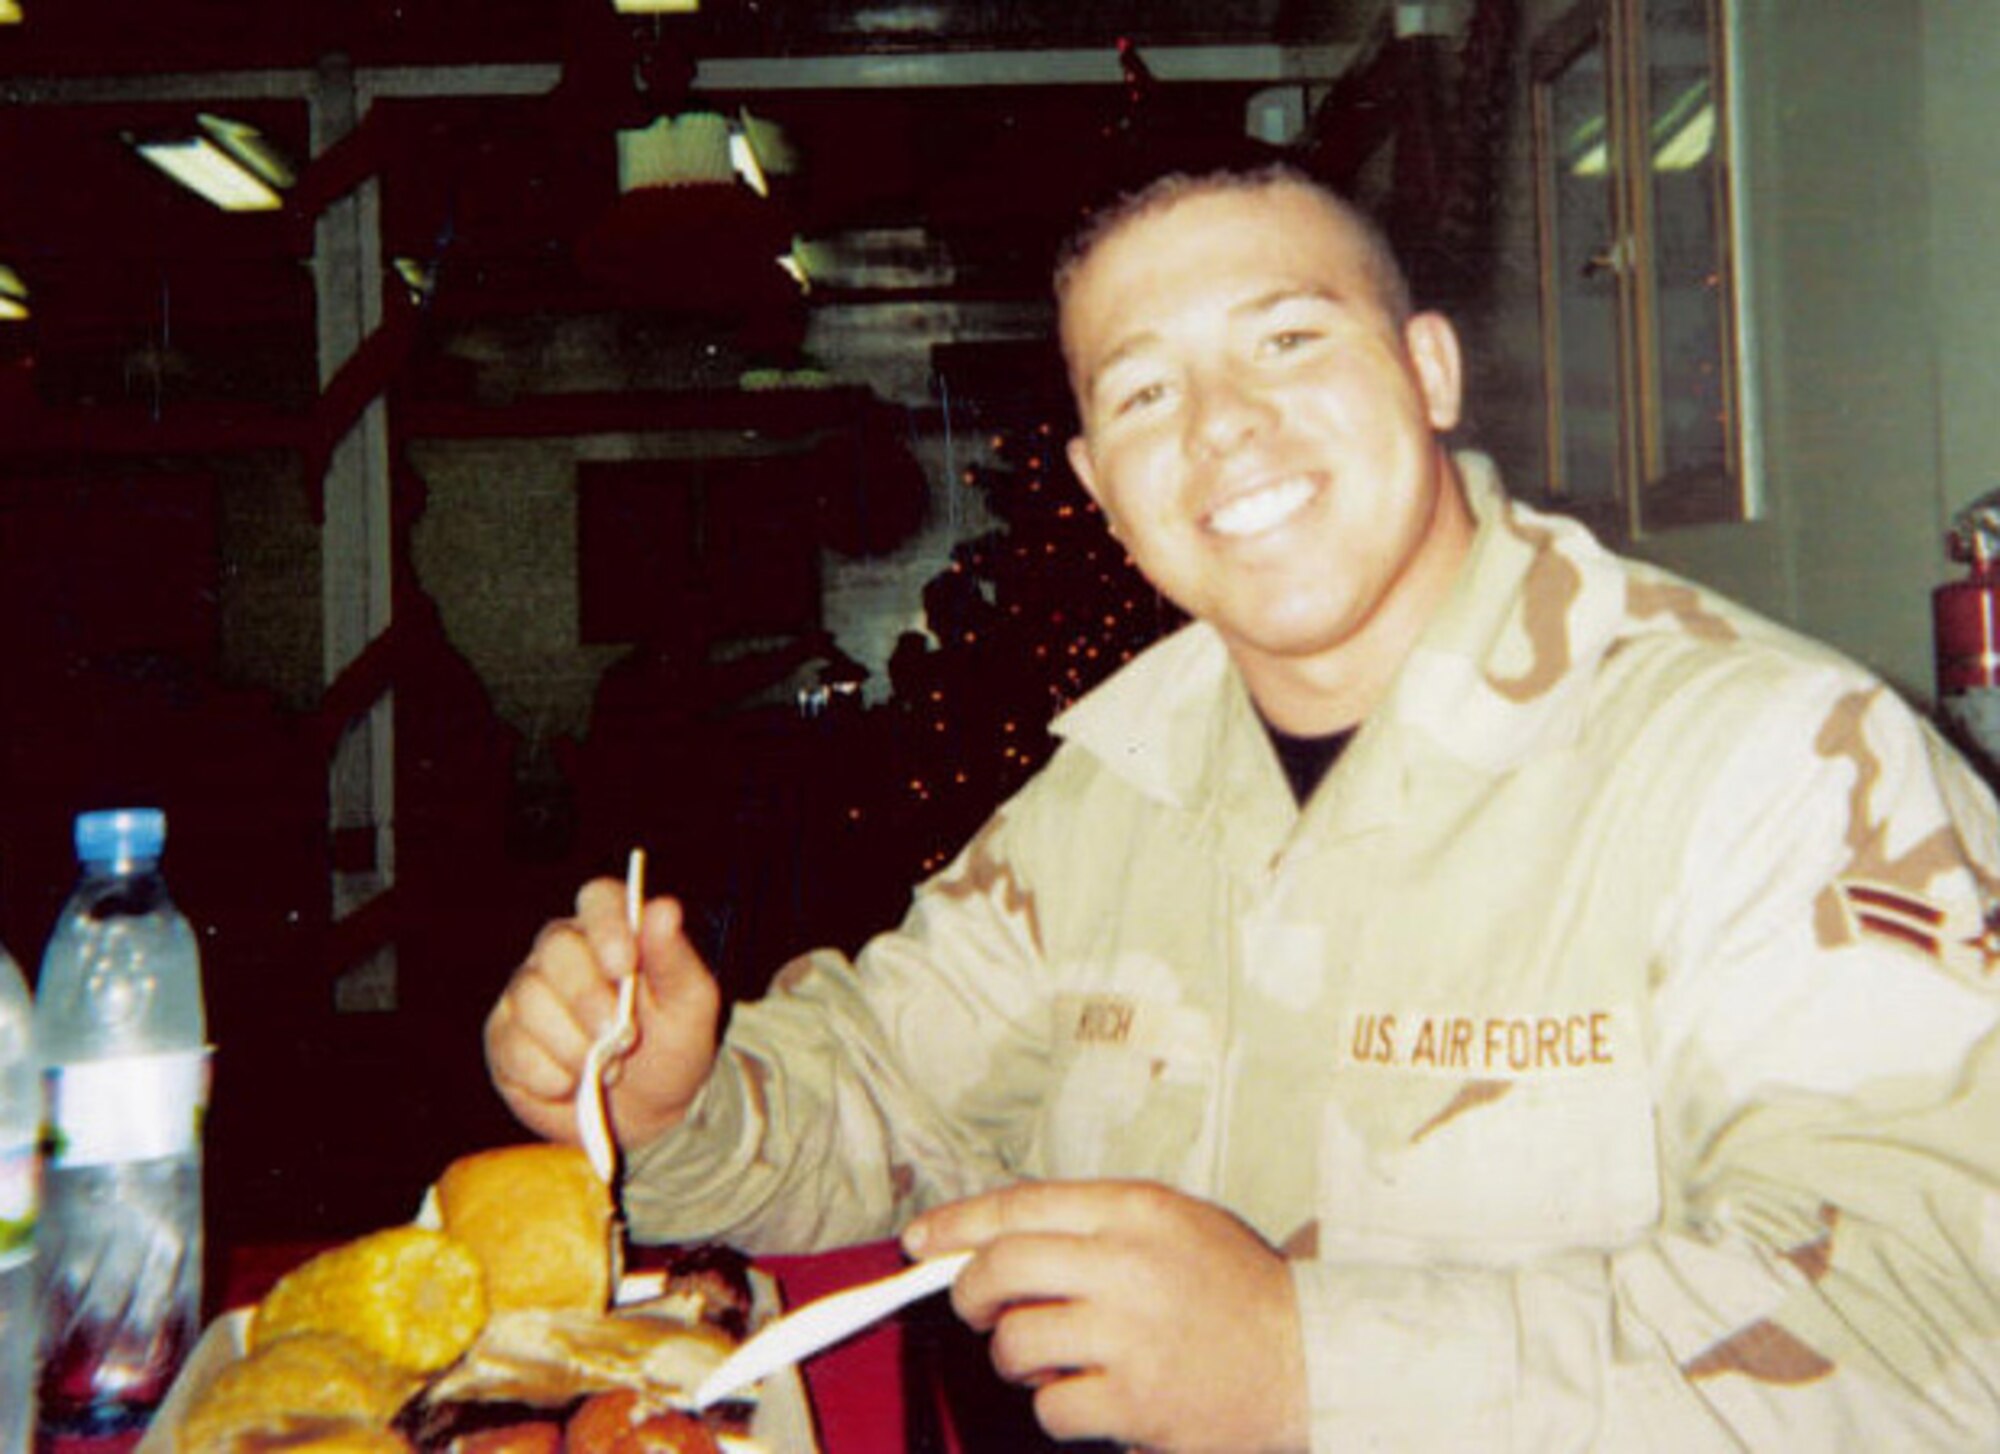 DAVIS-MONTHAN AIR FORCE BASE, Ariz. - Staff Sgt. Shawn Koch, 355th Aircraft Maintenance Squadron, aircraft fuel systems craftsman shift non-commissioned officer in charge – then, Airman 1st Class Koch – enjoys his Thanksgiving dinner during his first deployment to Afghanistan in 2003. (Courtesy photo)